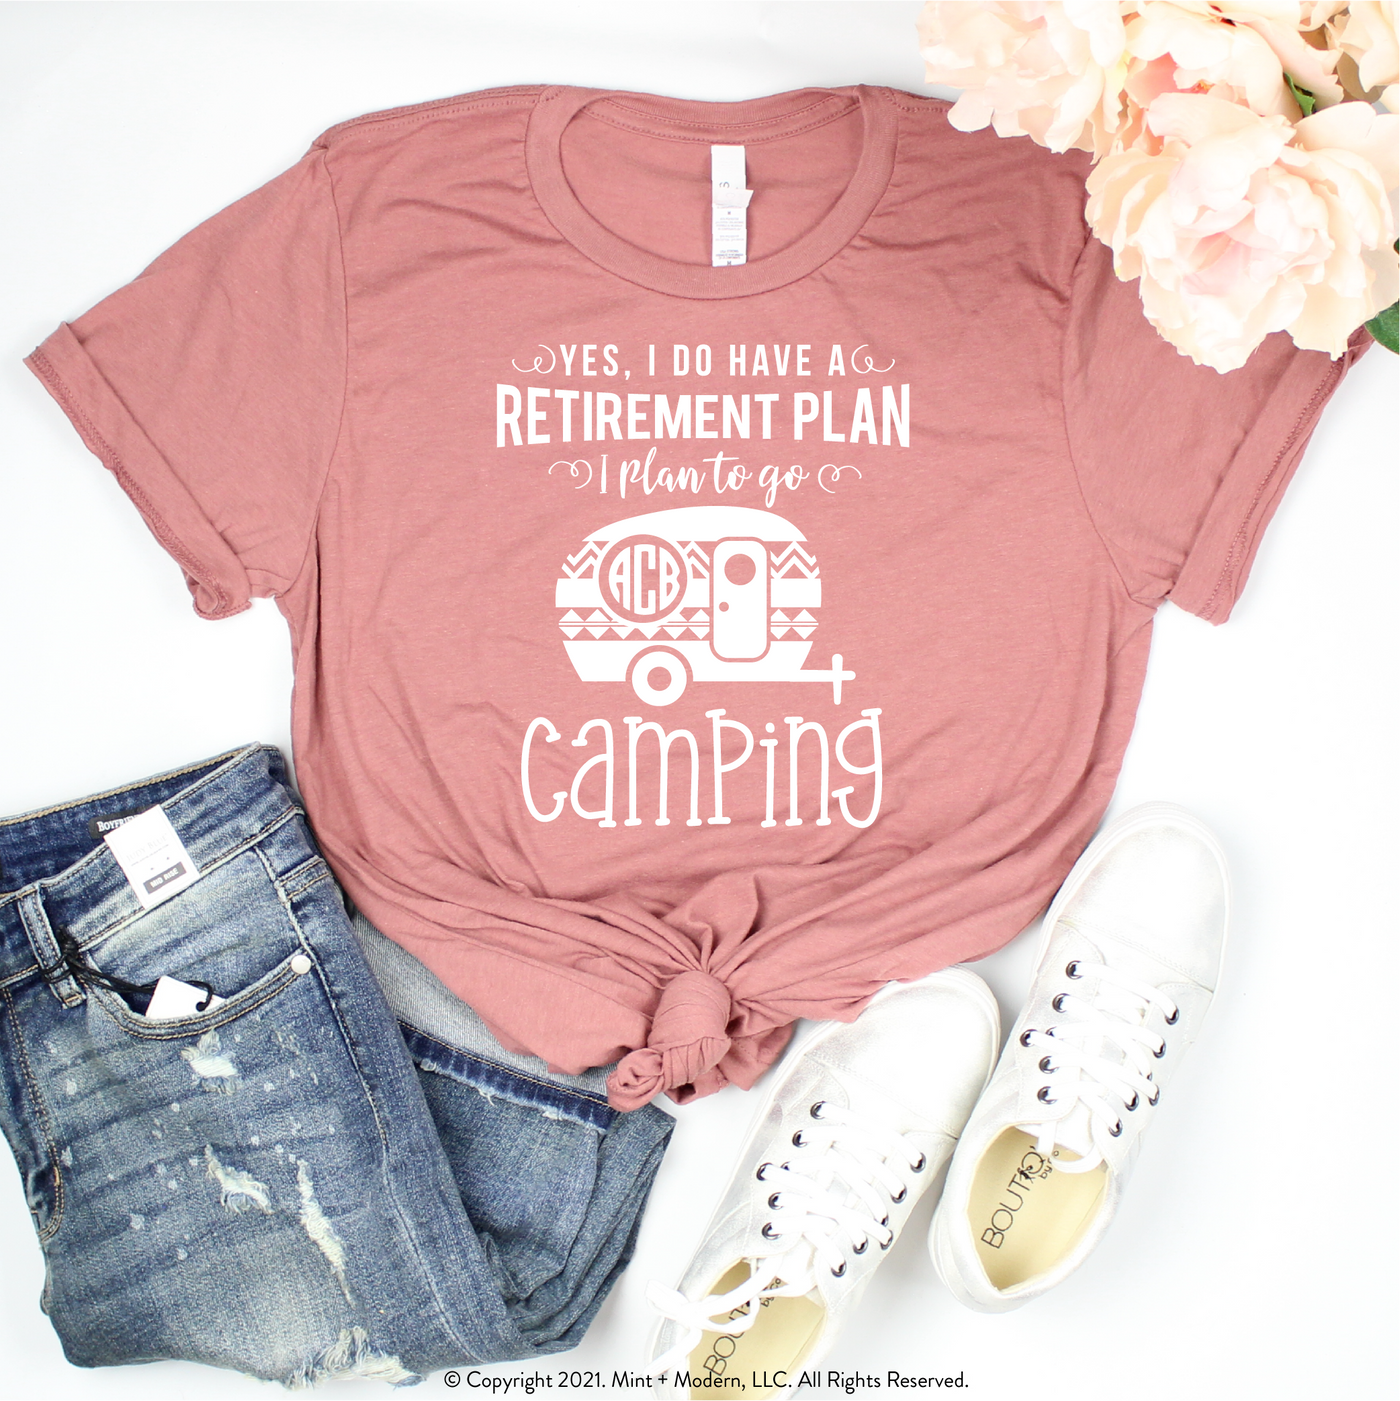 Yes I Do Have A Retirement Plan I Plan To Go Camping Shirt with Monogram